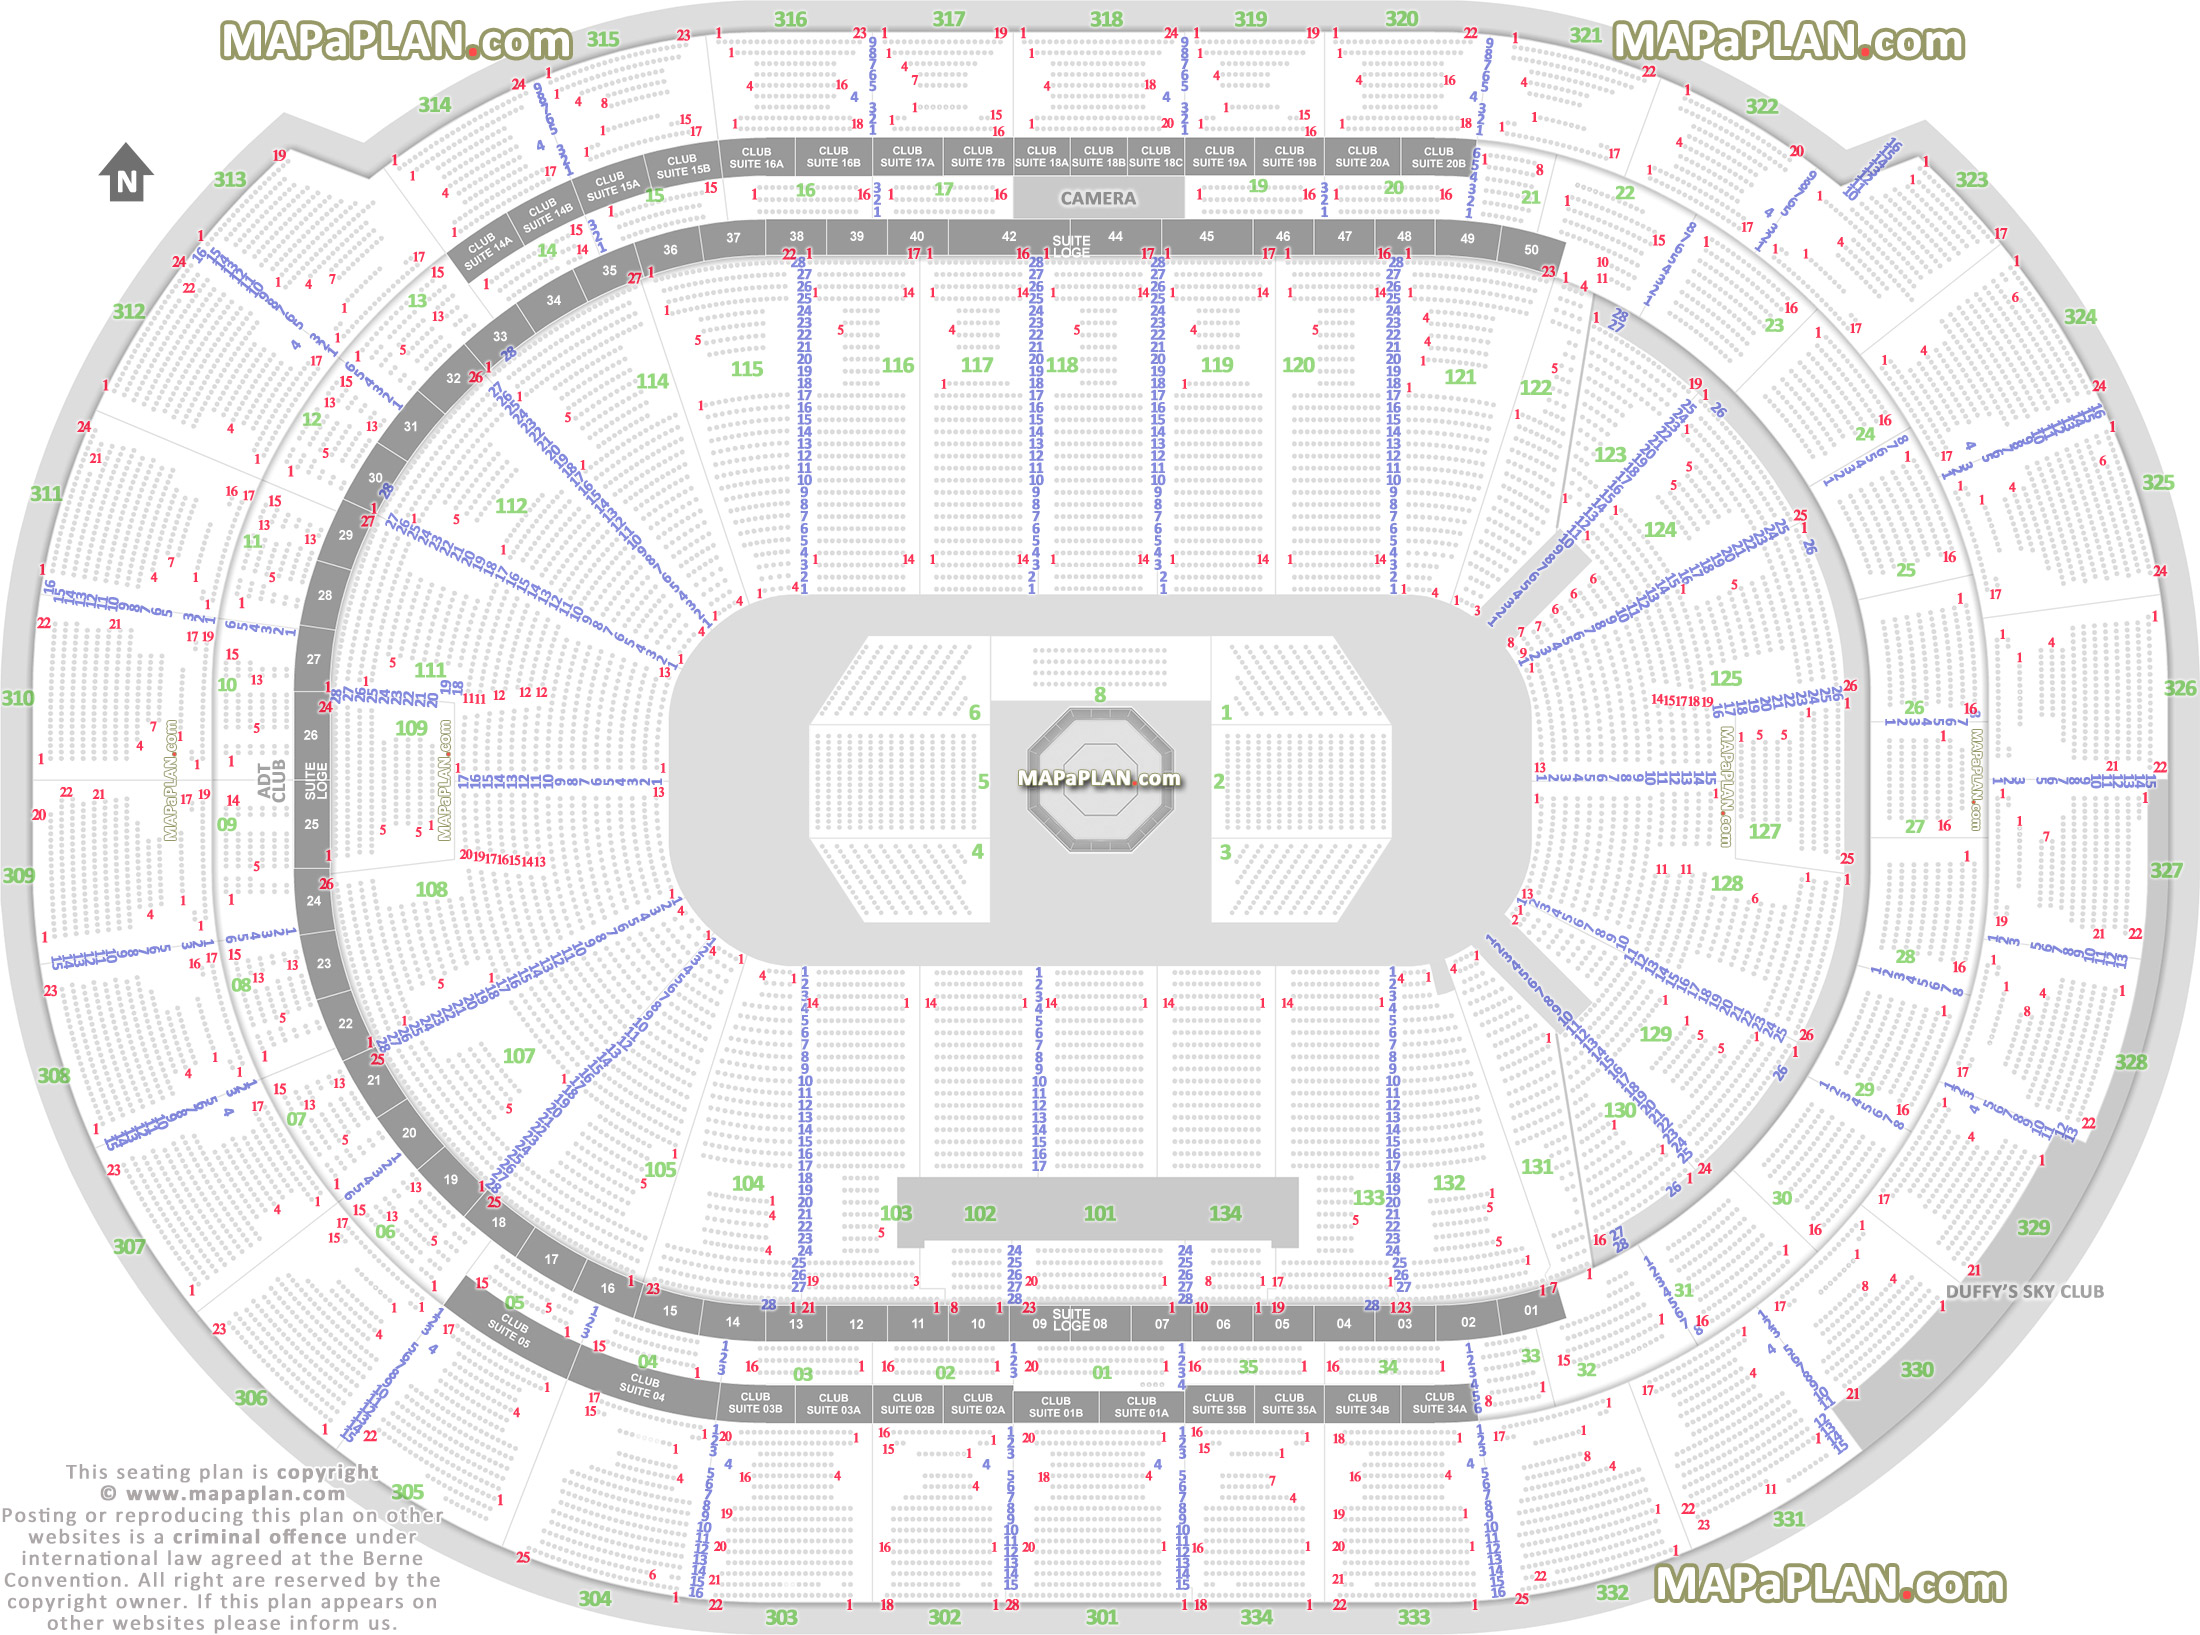 ufc mma fights fully seated setup chart viewer premium executive vip lounge wheelchair disabled seating row 3 section 302 304 306 308 309 310 311 Sunrise FLA Live Arena seating chart